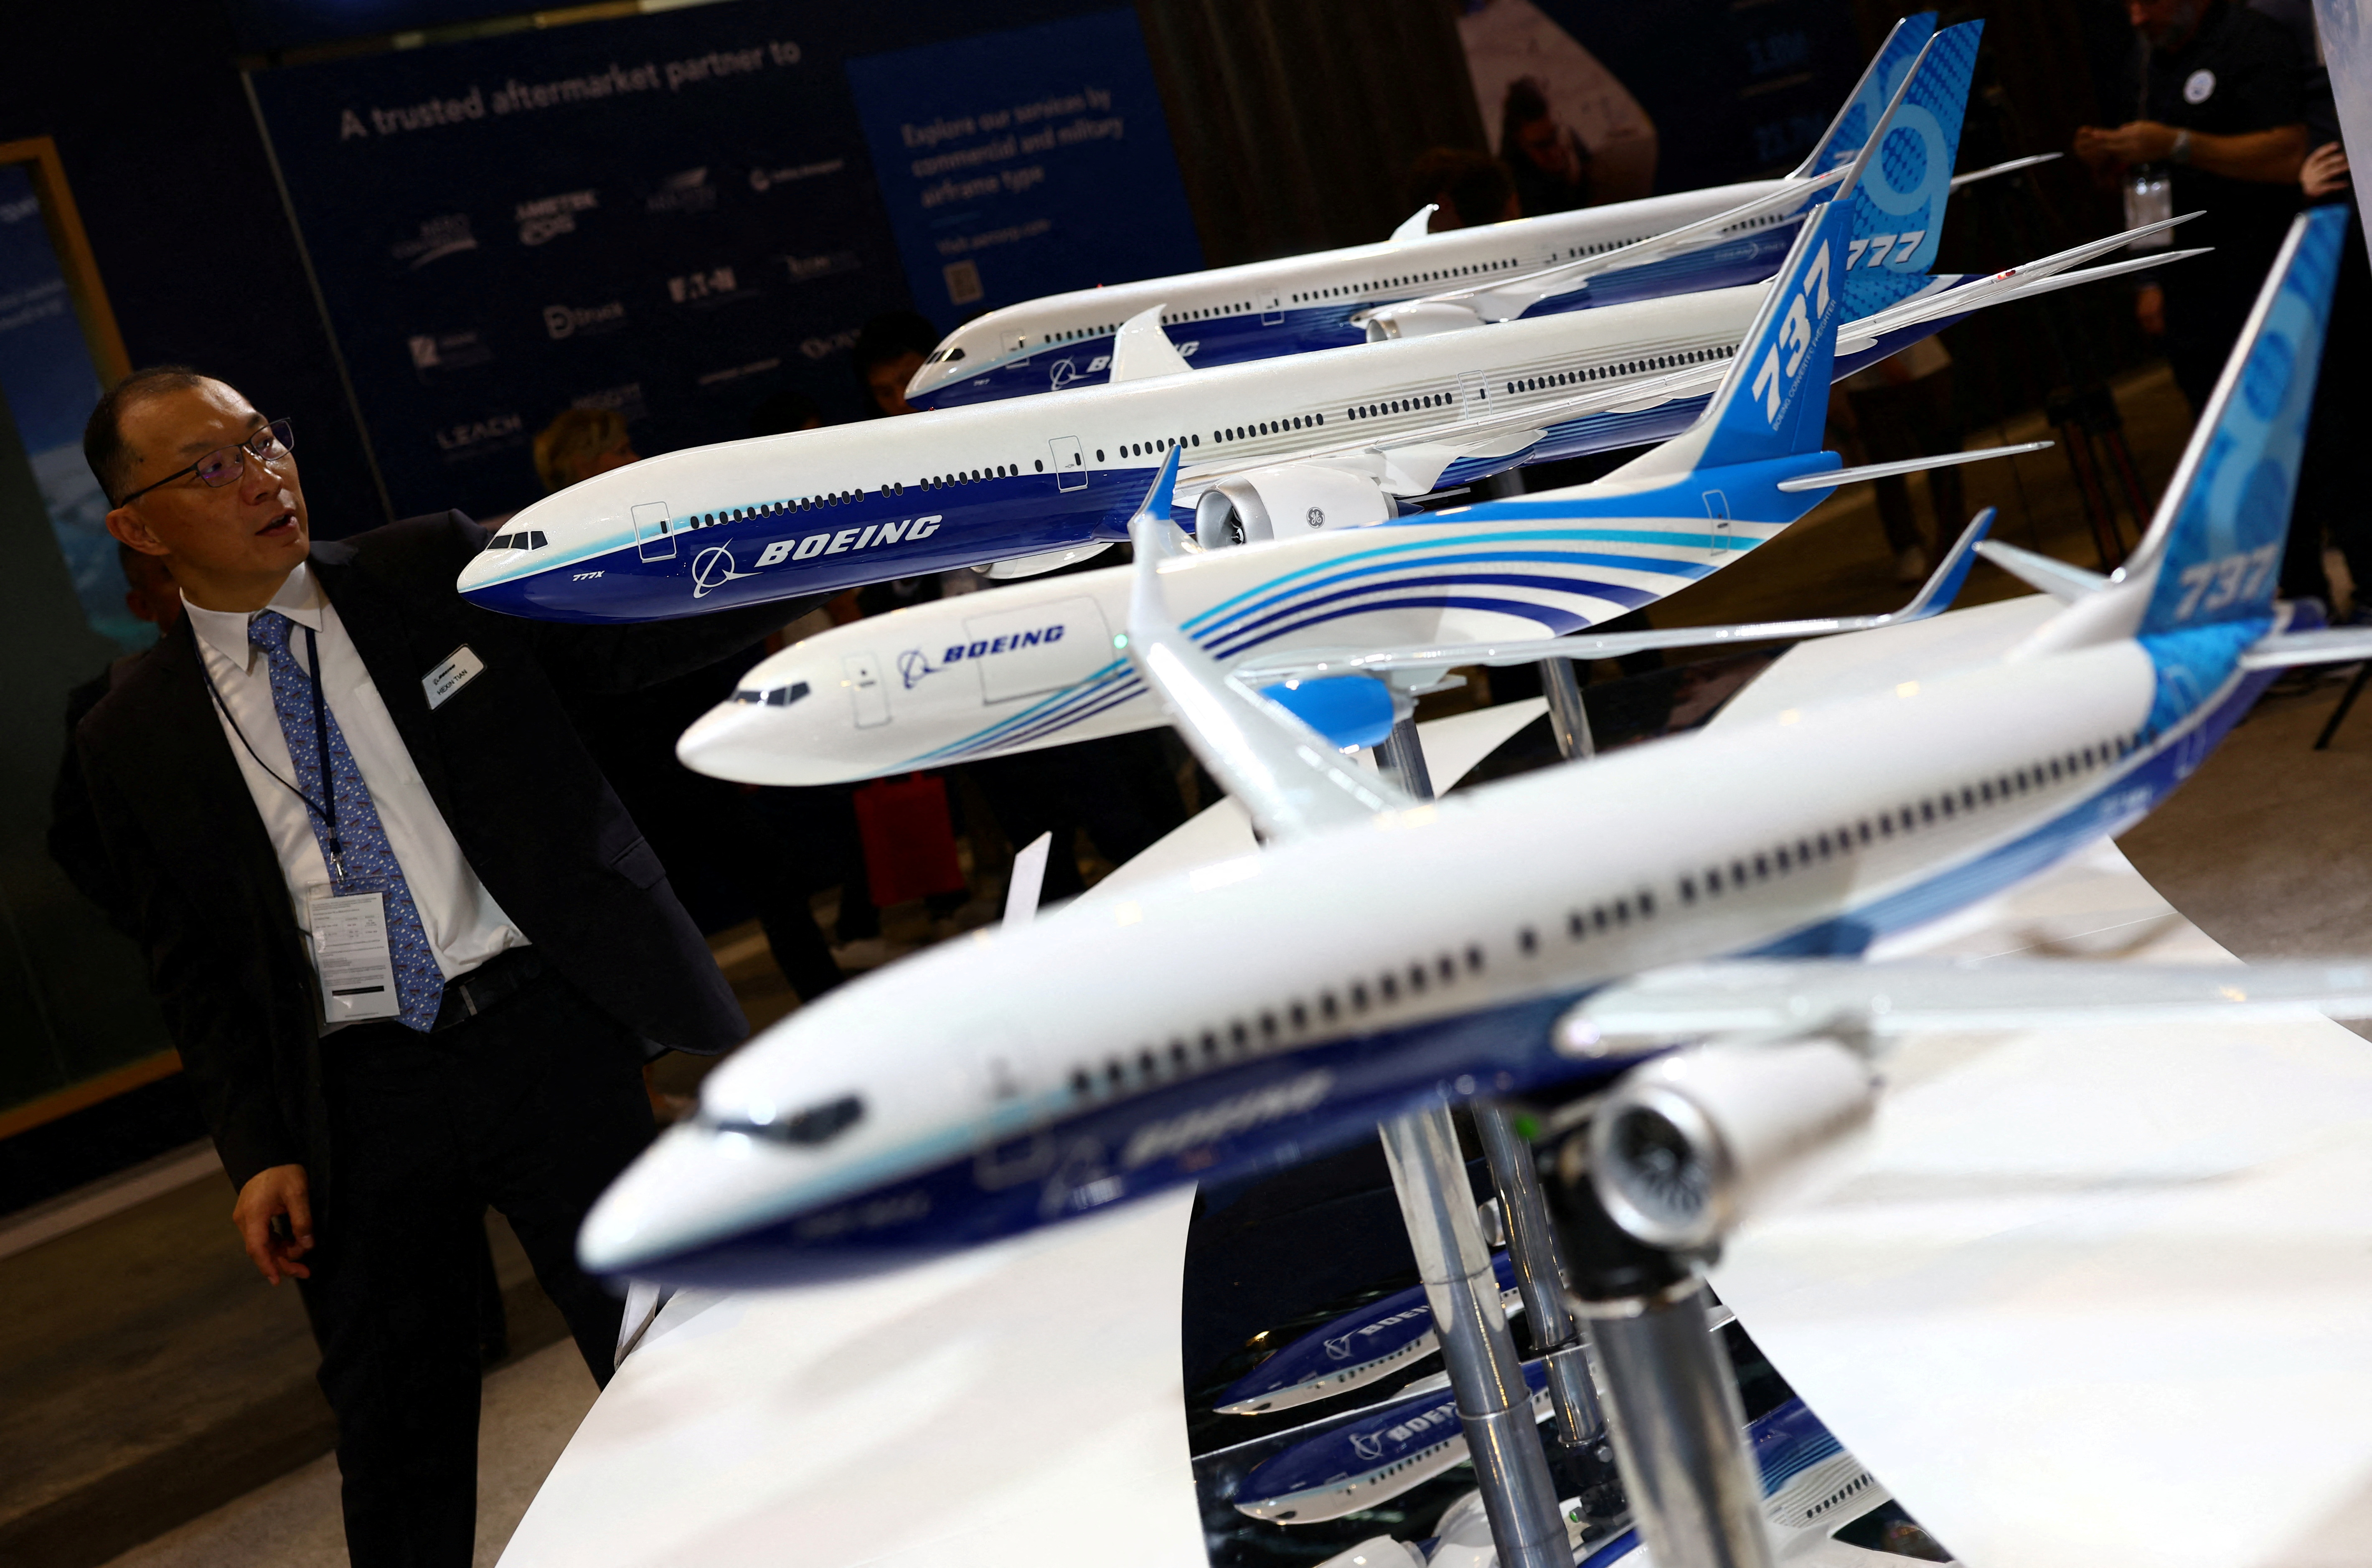 A man passes Boeing model planes on display at the Singapore Airshow at Changi Exhibition Centre in Singapore